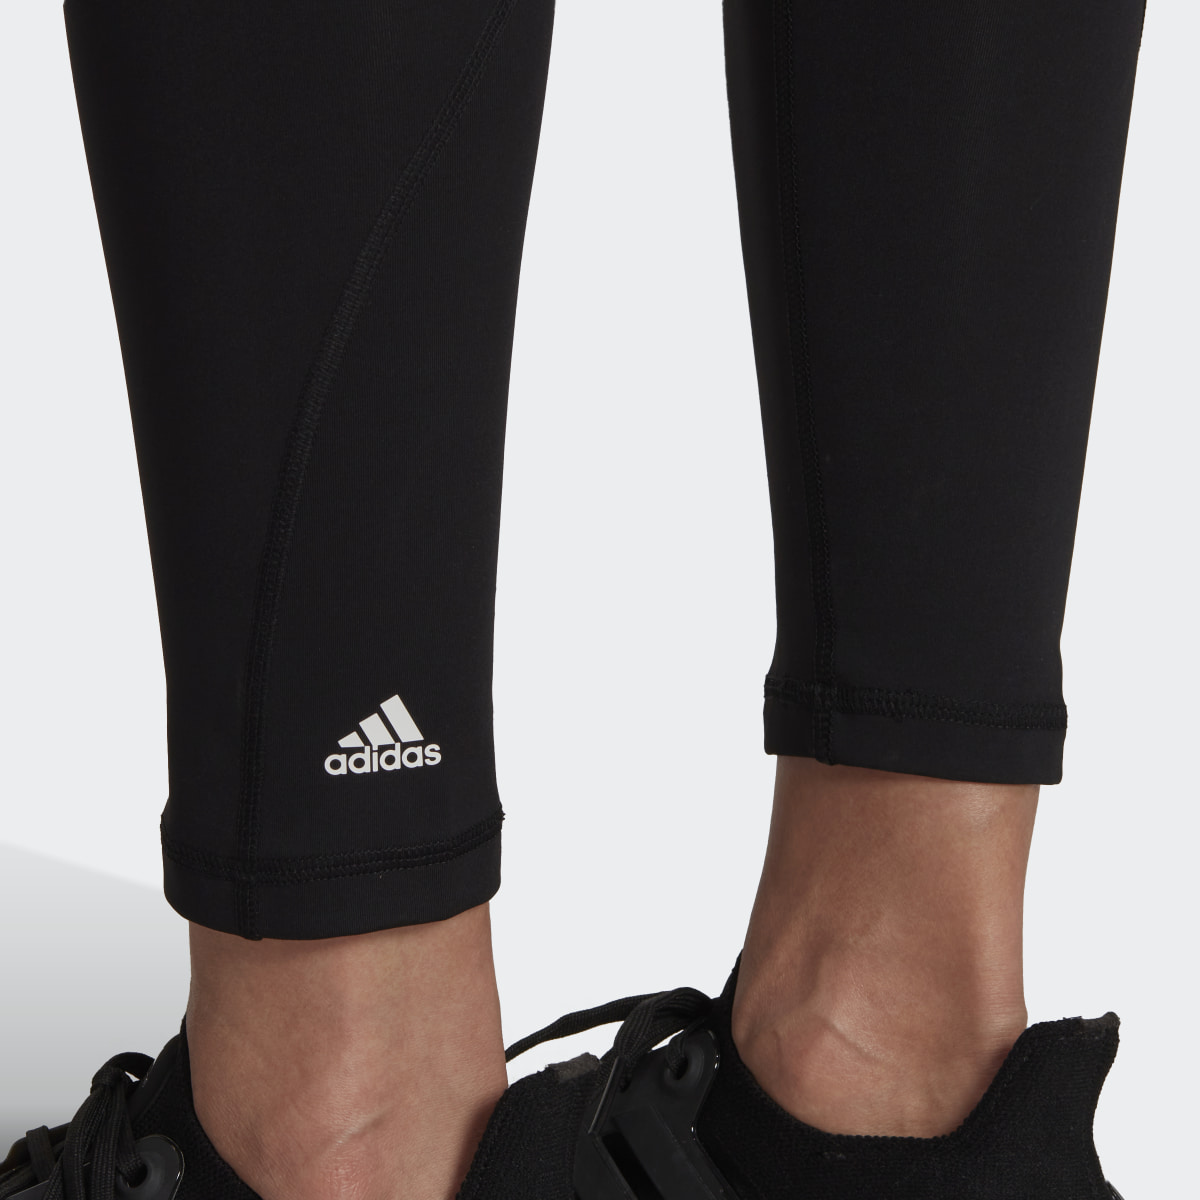 Adidas Optime Training Period-Proof 7/8 Tights. 6